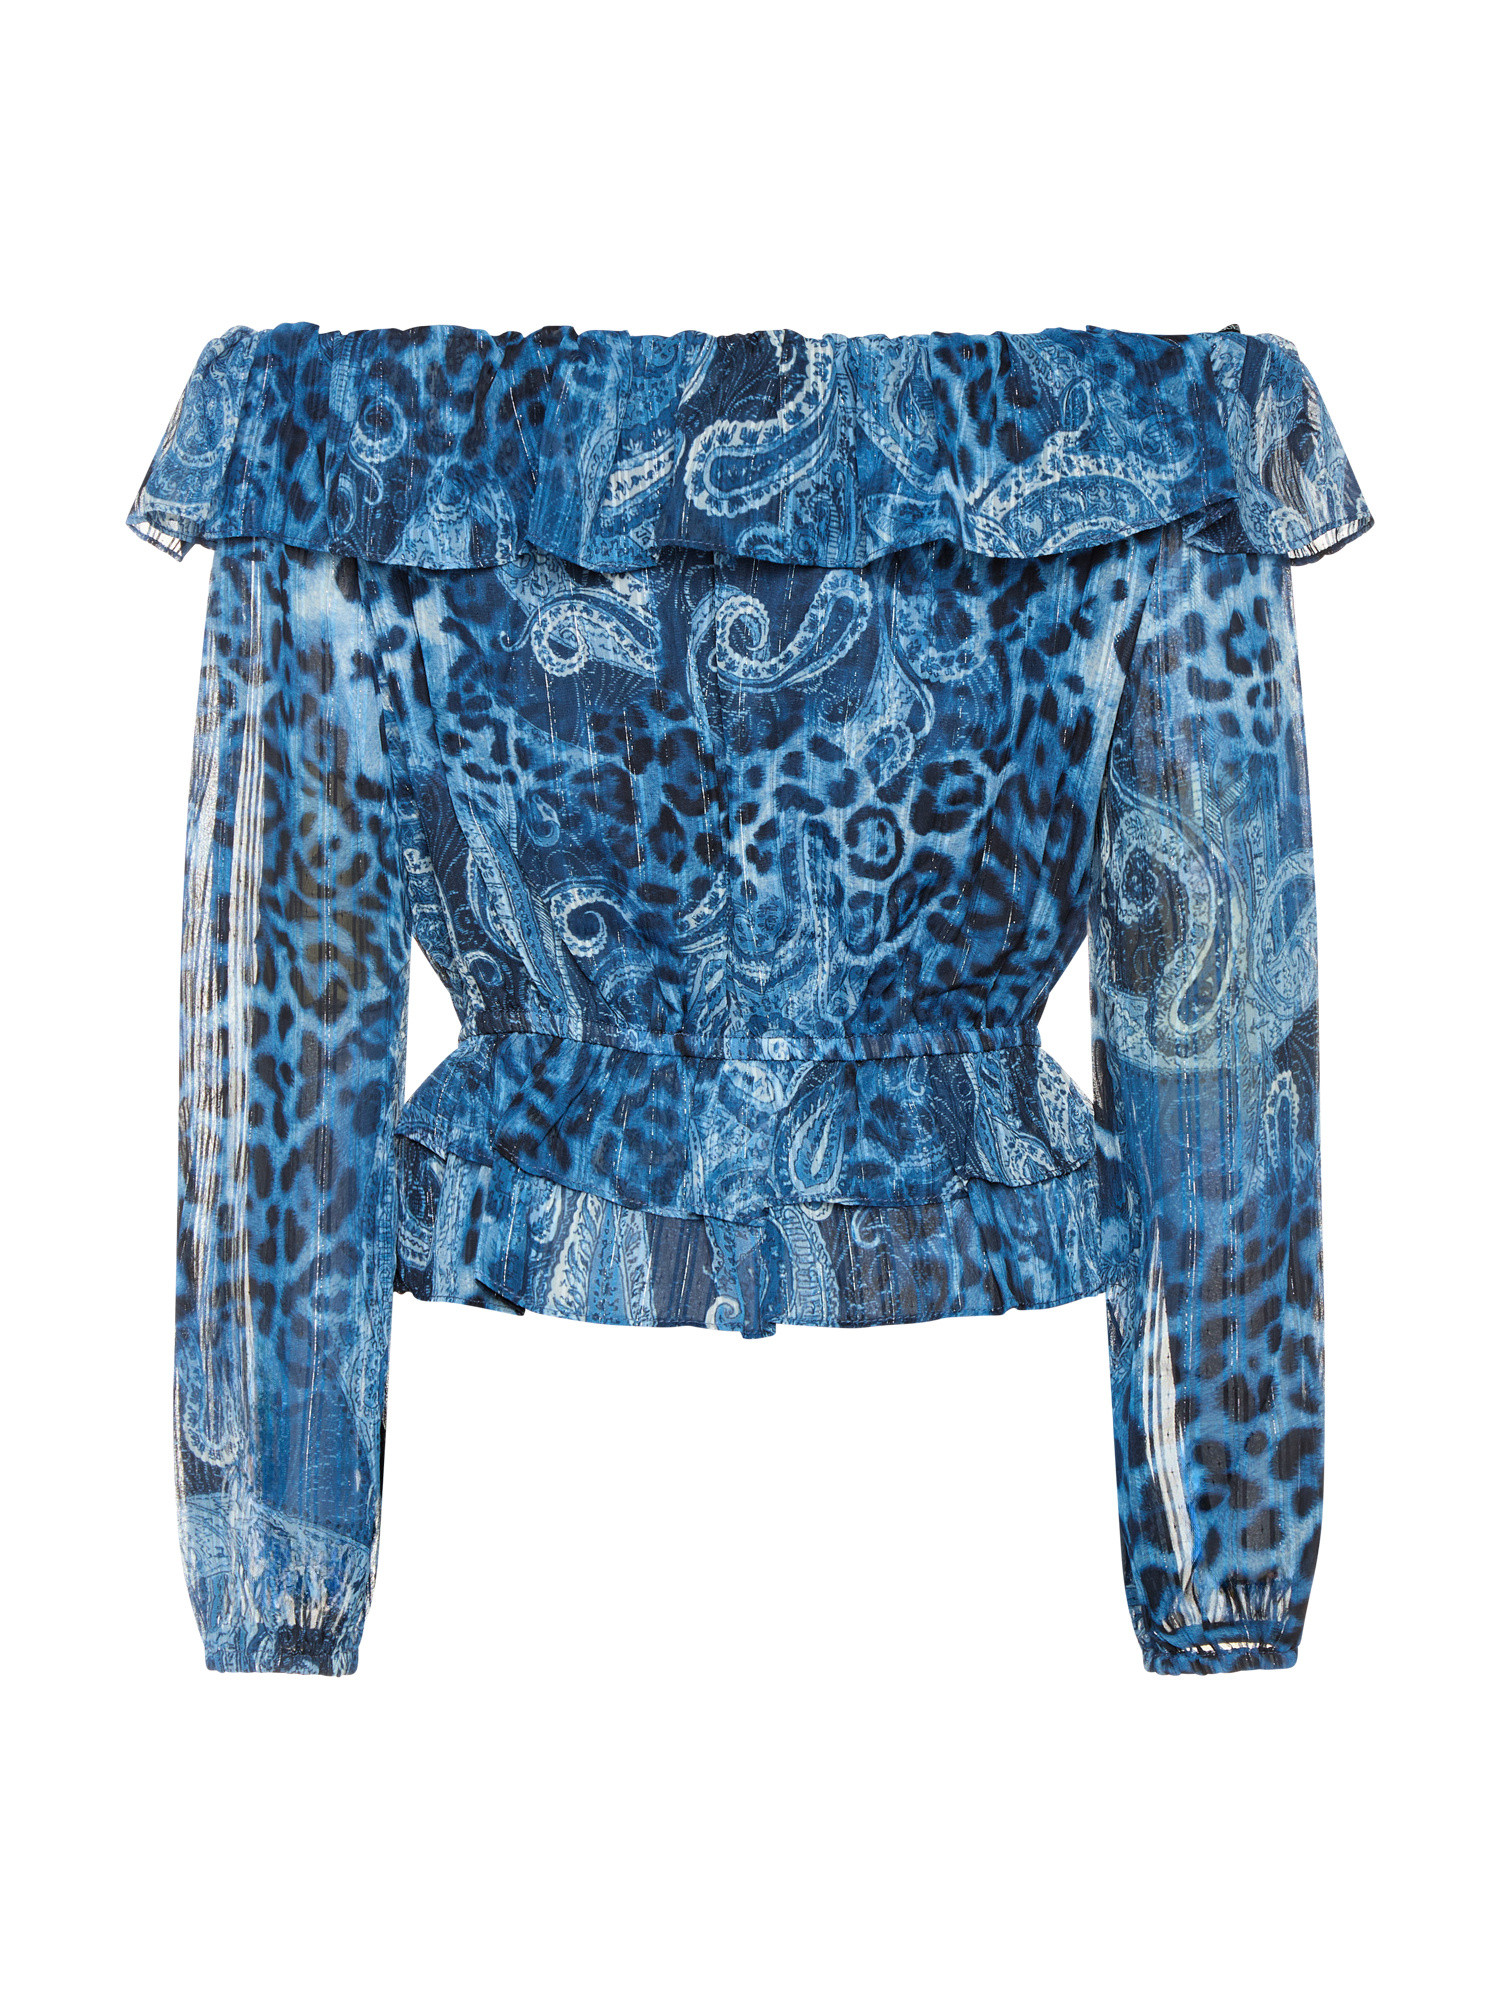 Guess - Blusa stampa paisley, Azzurro scuro, large image number 1